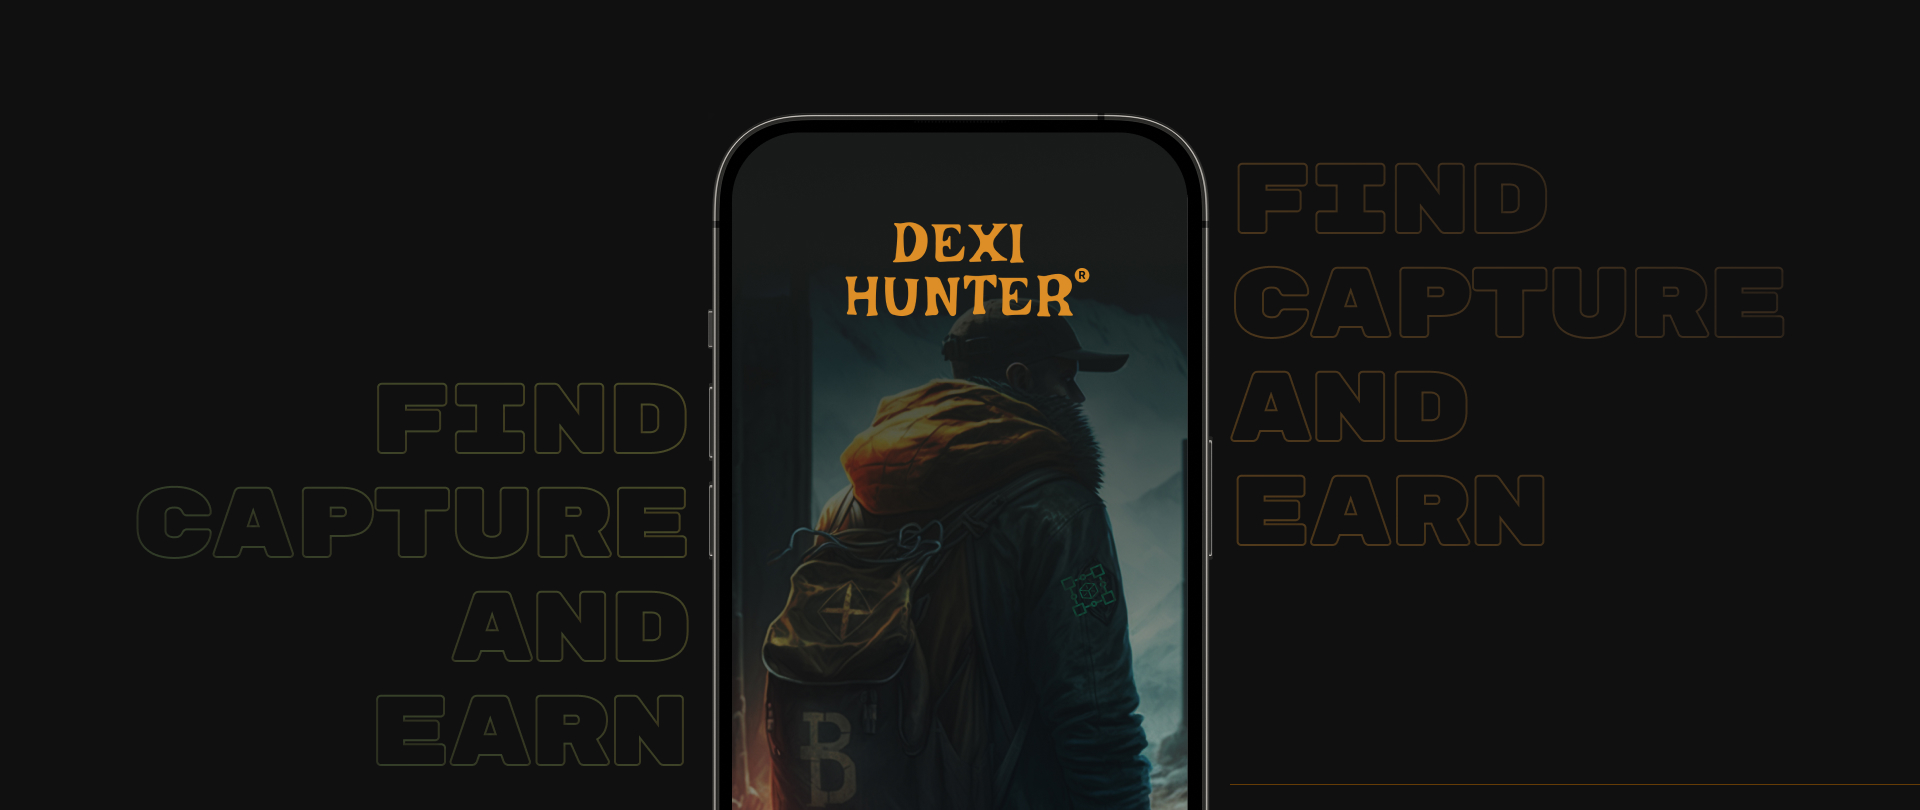 DexiHunter where AR meets crypto rewards, making monster-hunting a profitable adventure